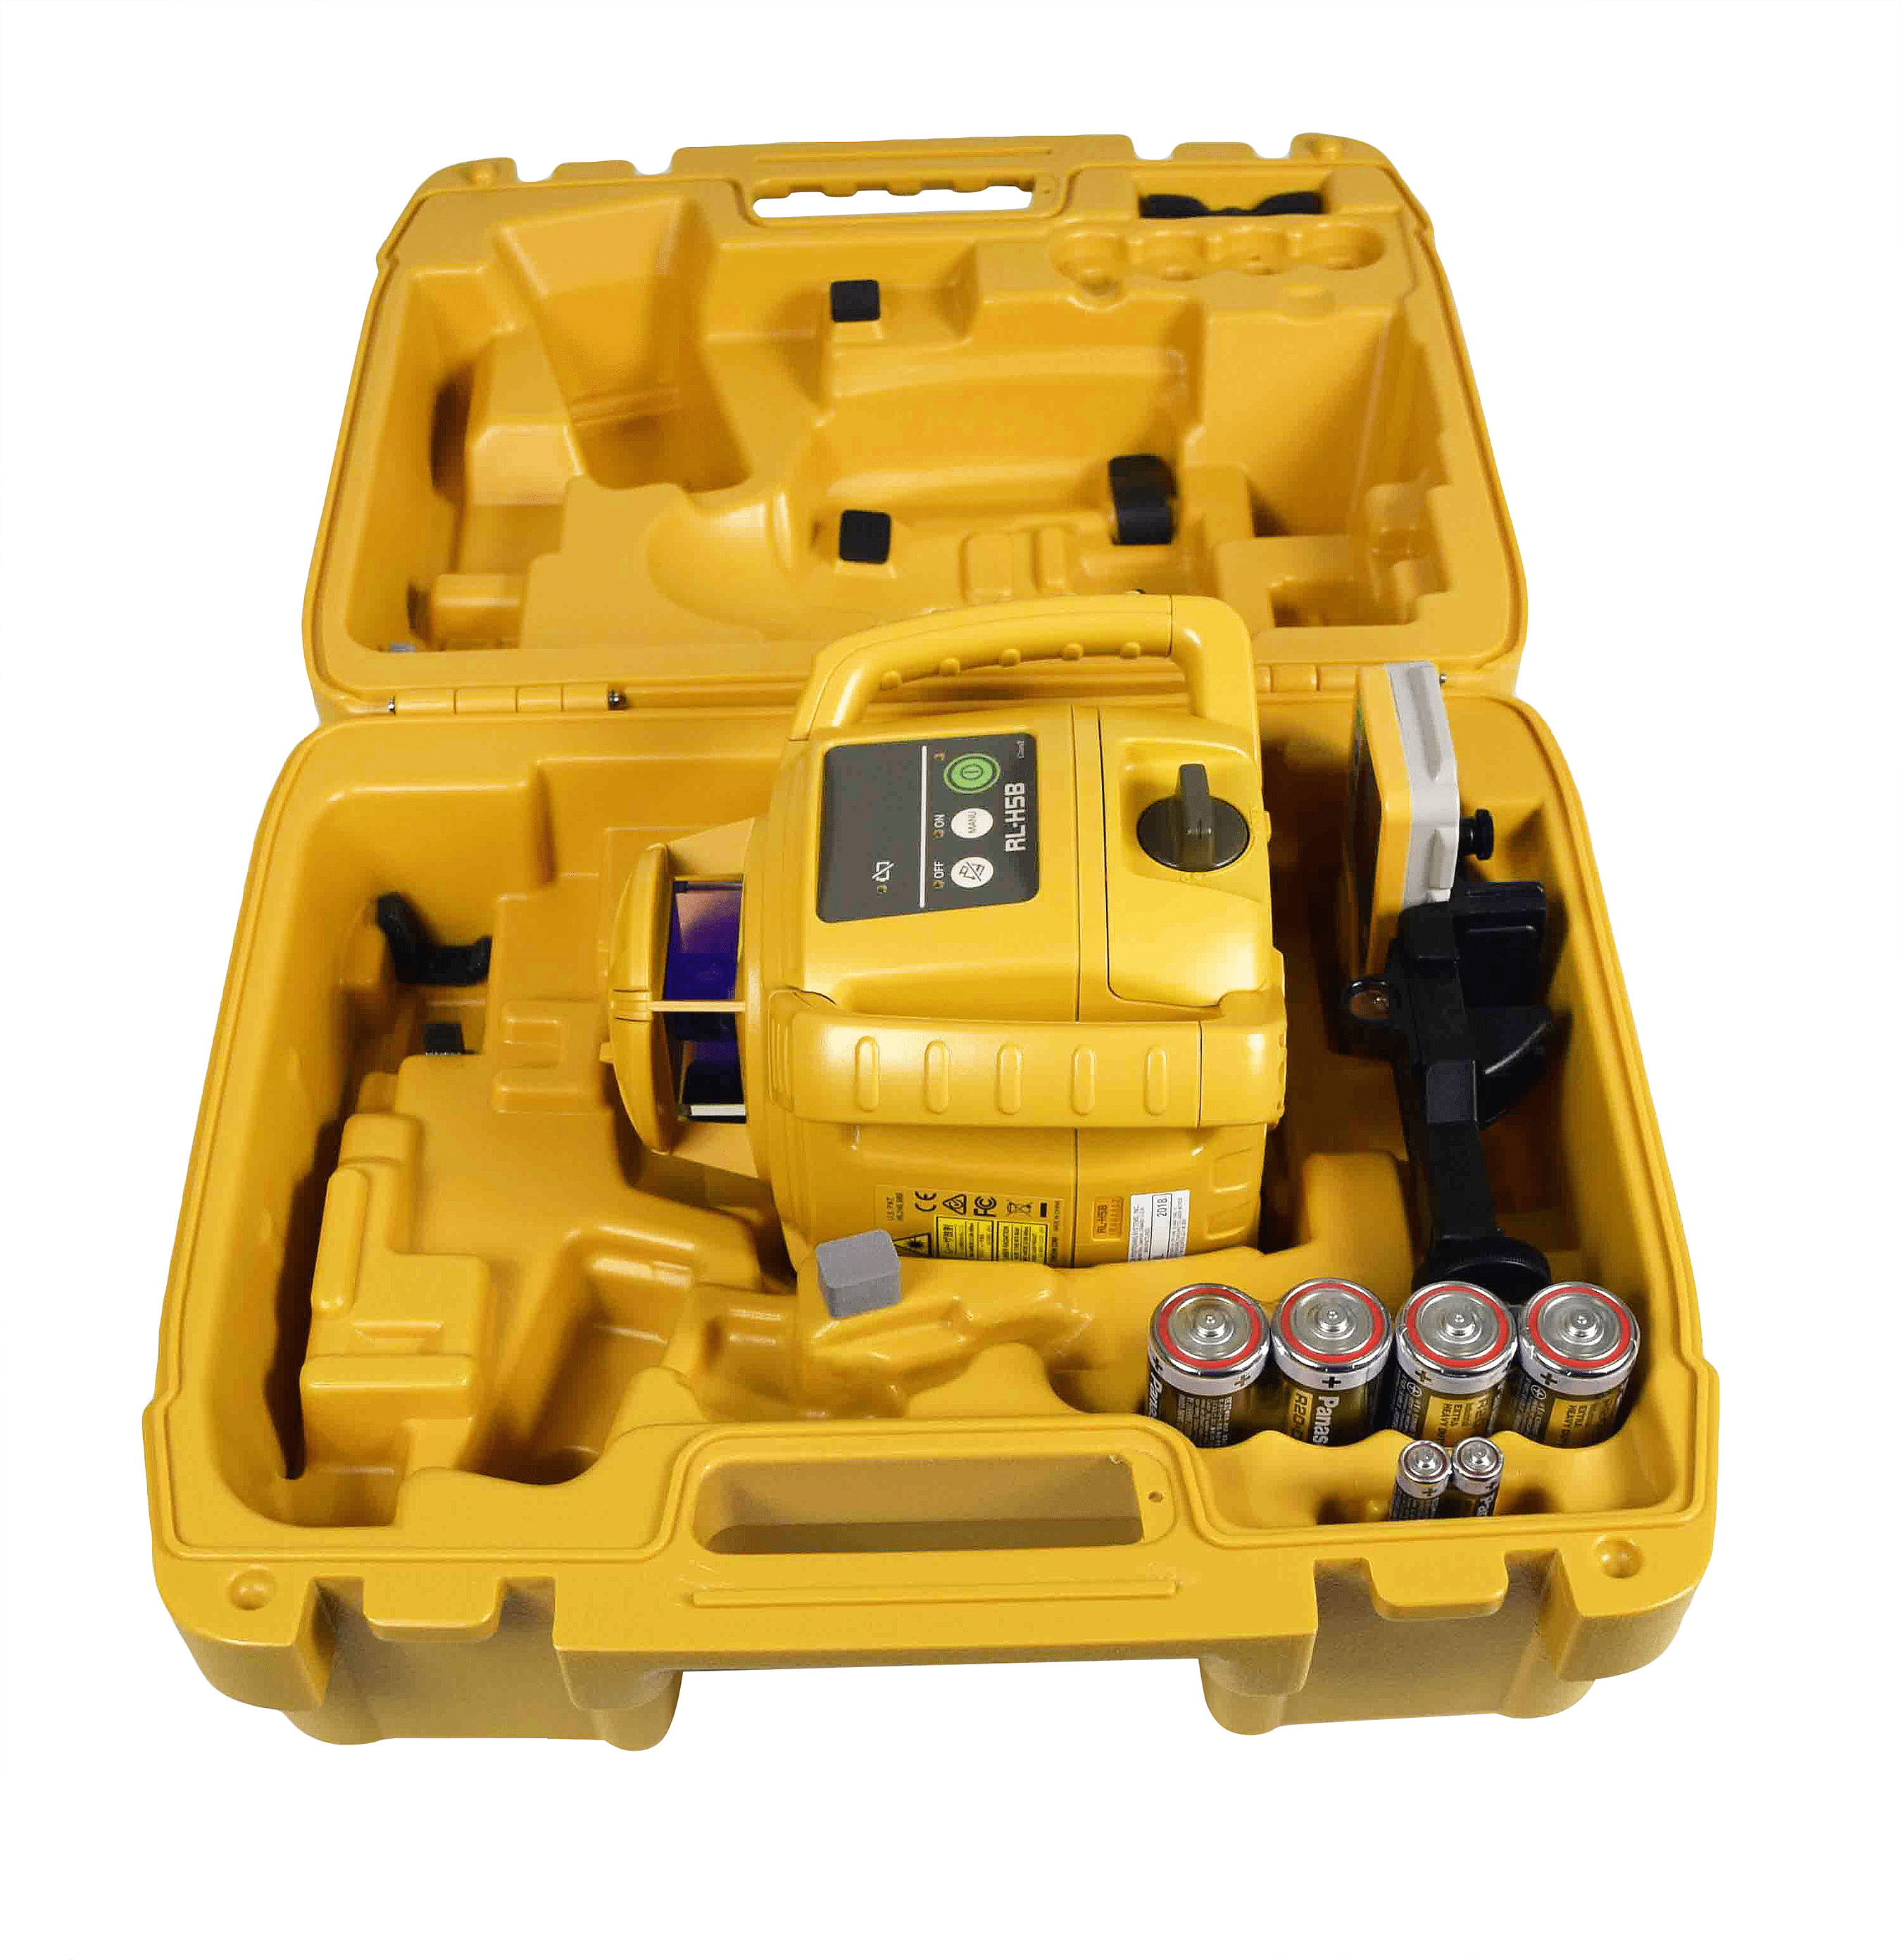 FREE SHIPPING TOPCON RL-H5A SELF-LEVELING ROTARY GRADE LASER LEVEL BRAND NEW 